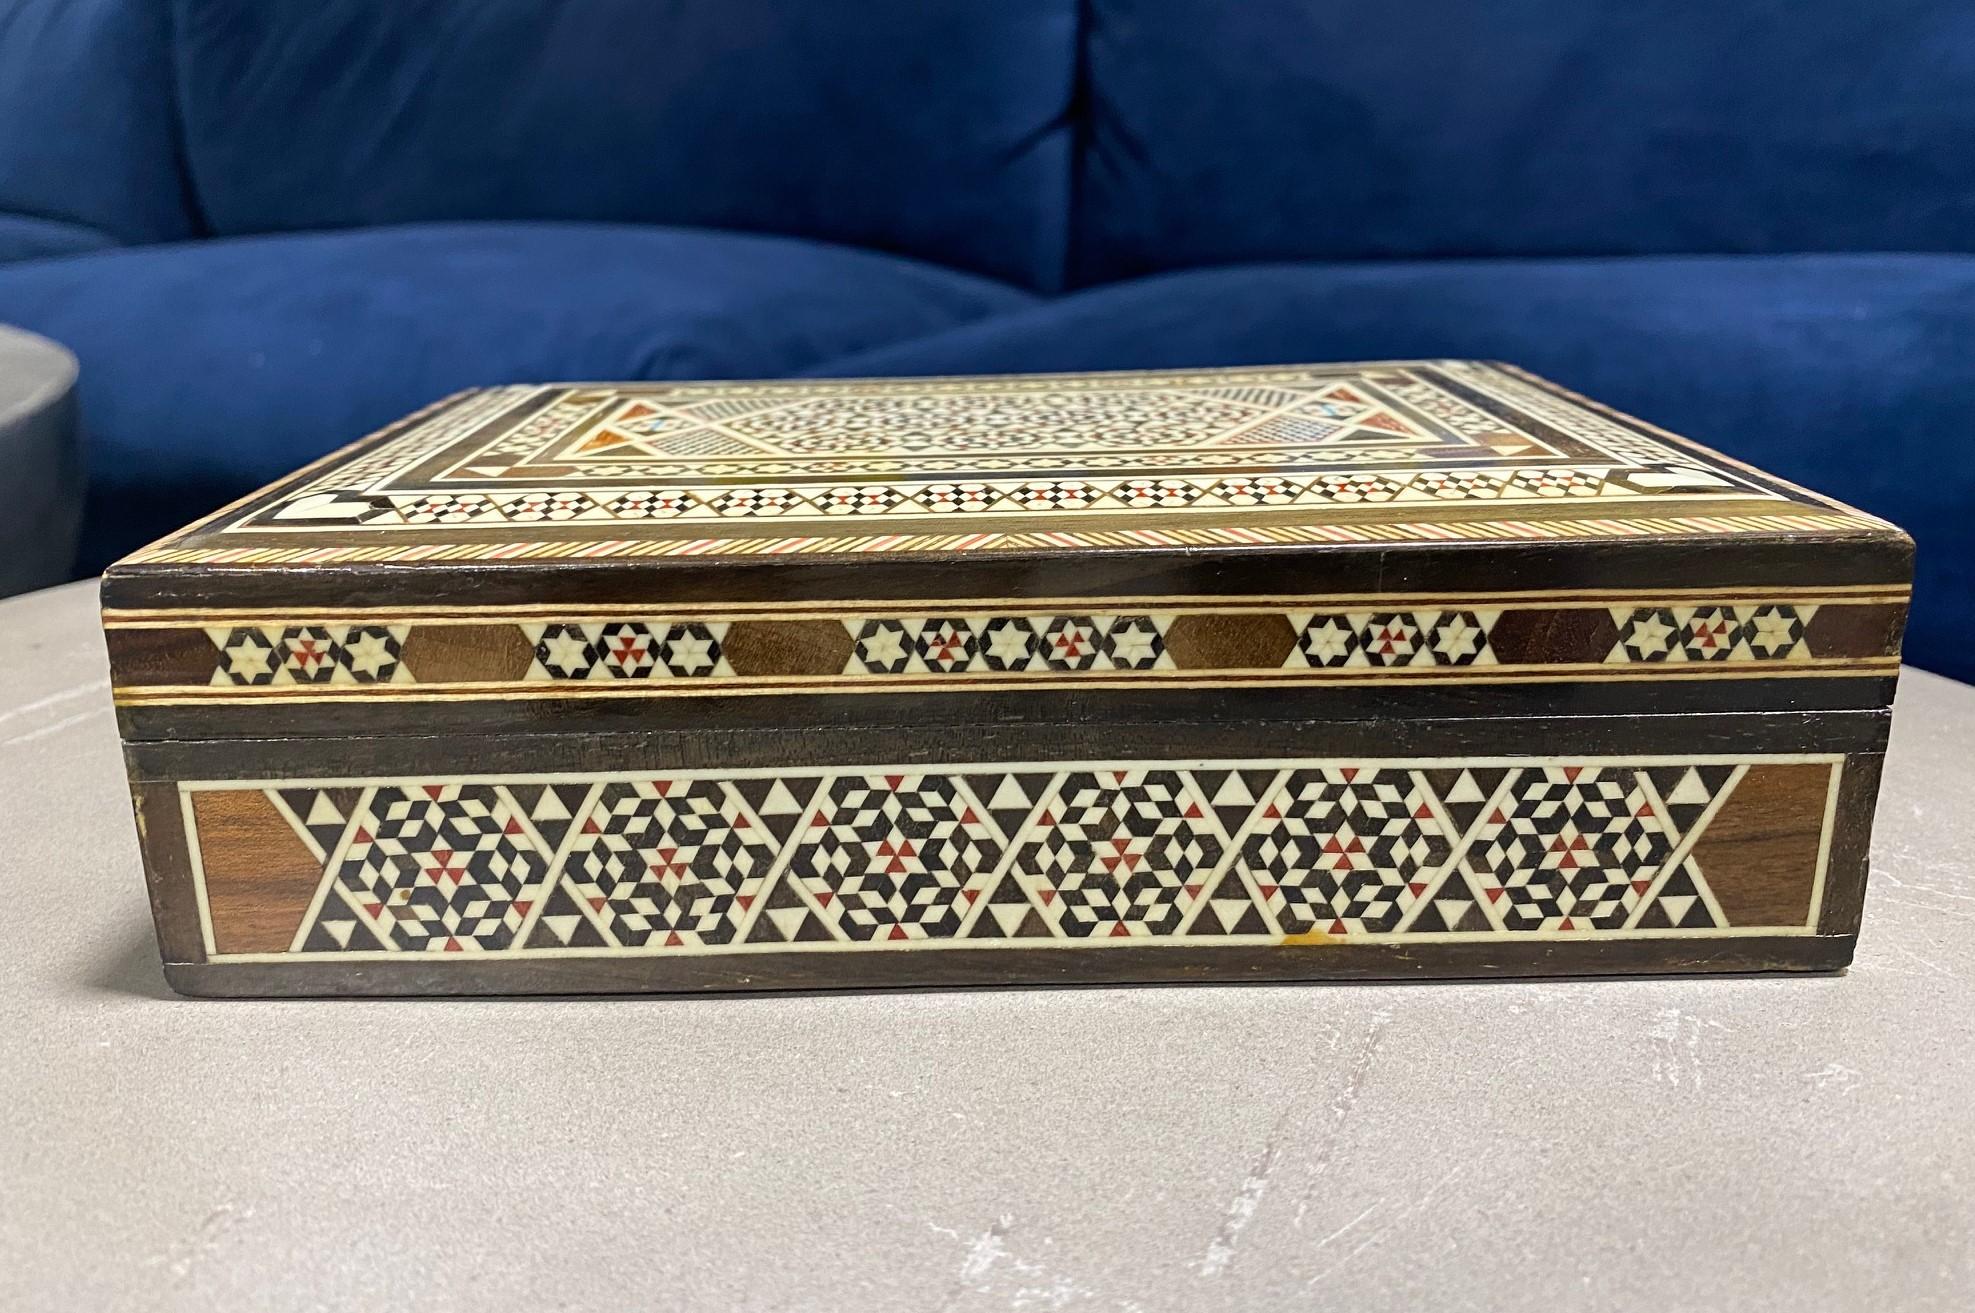 inlaid wooden boxes